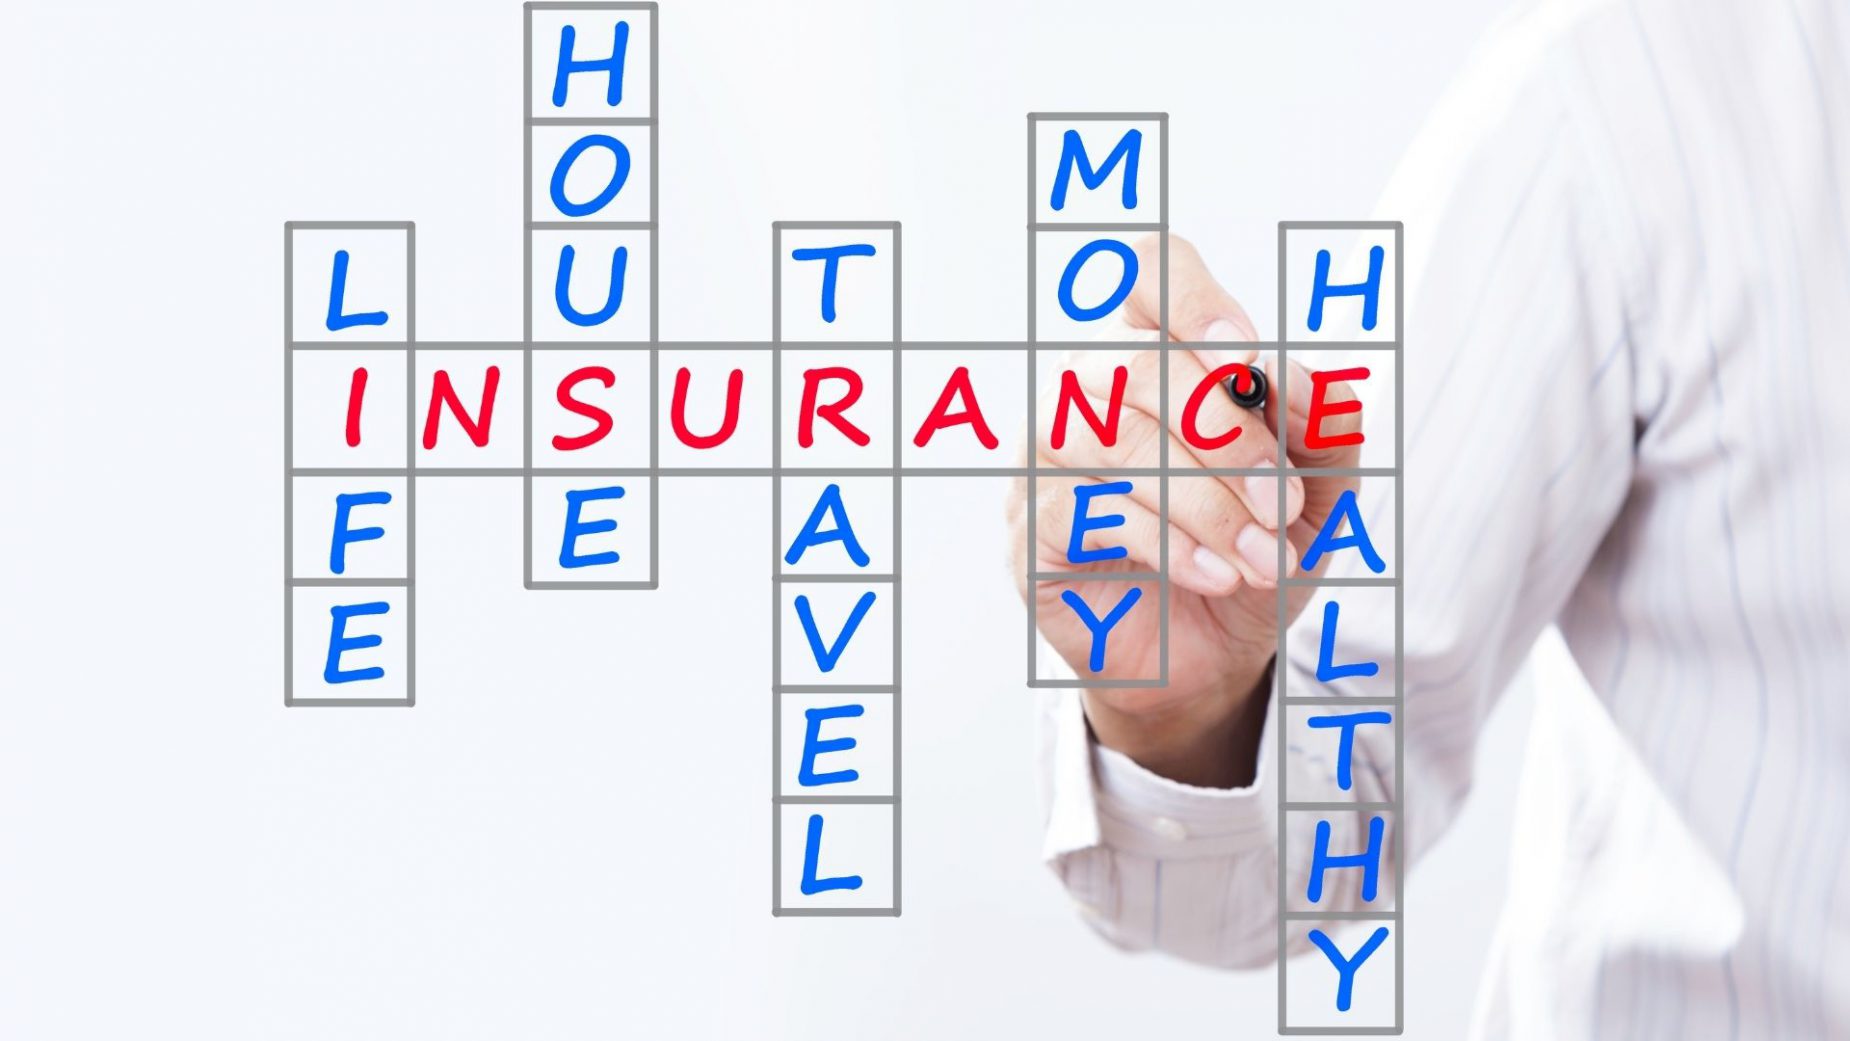 Global Insurance Market Outlook, Opportunities And Strategies